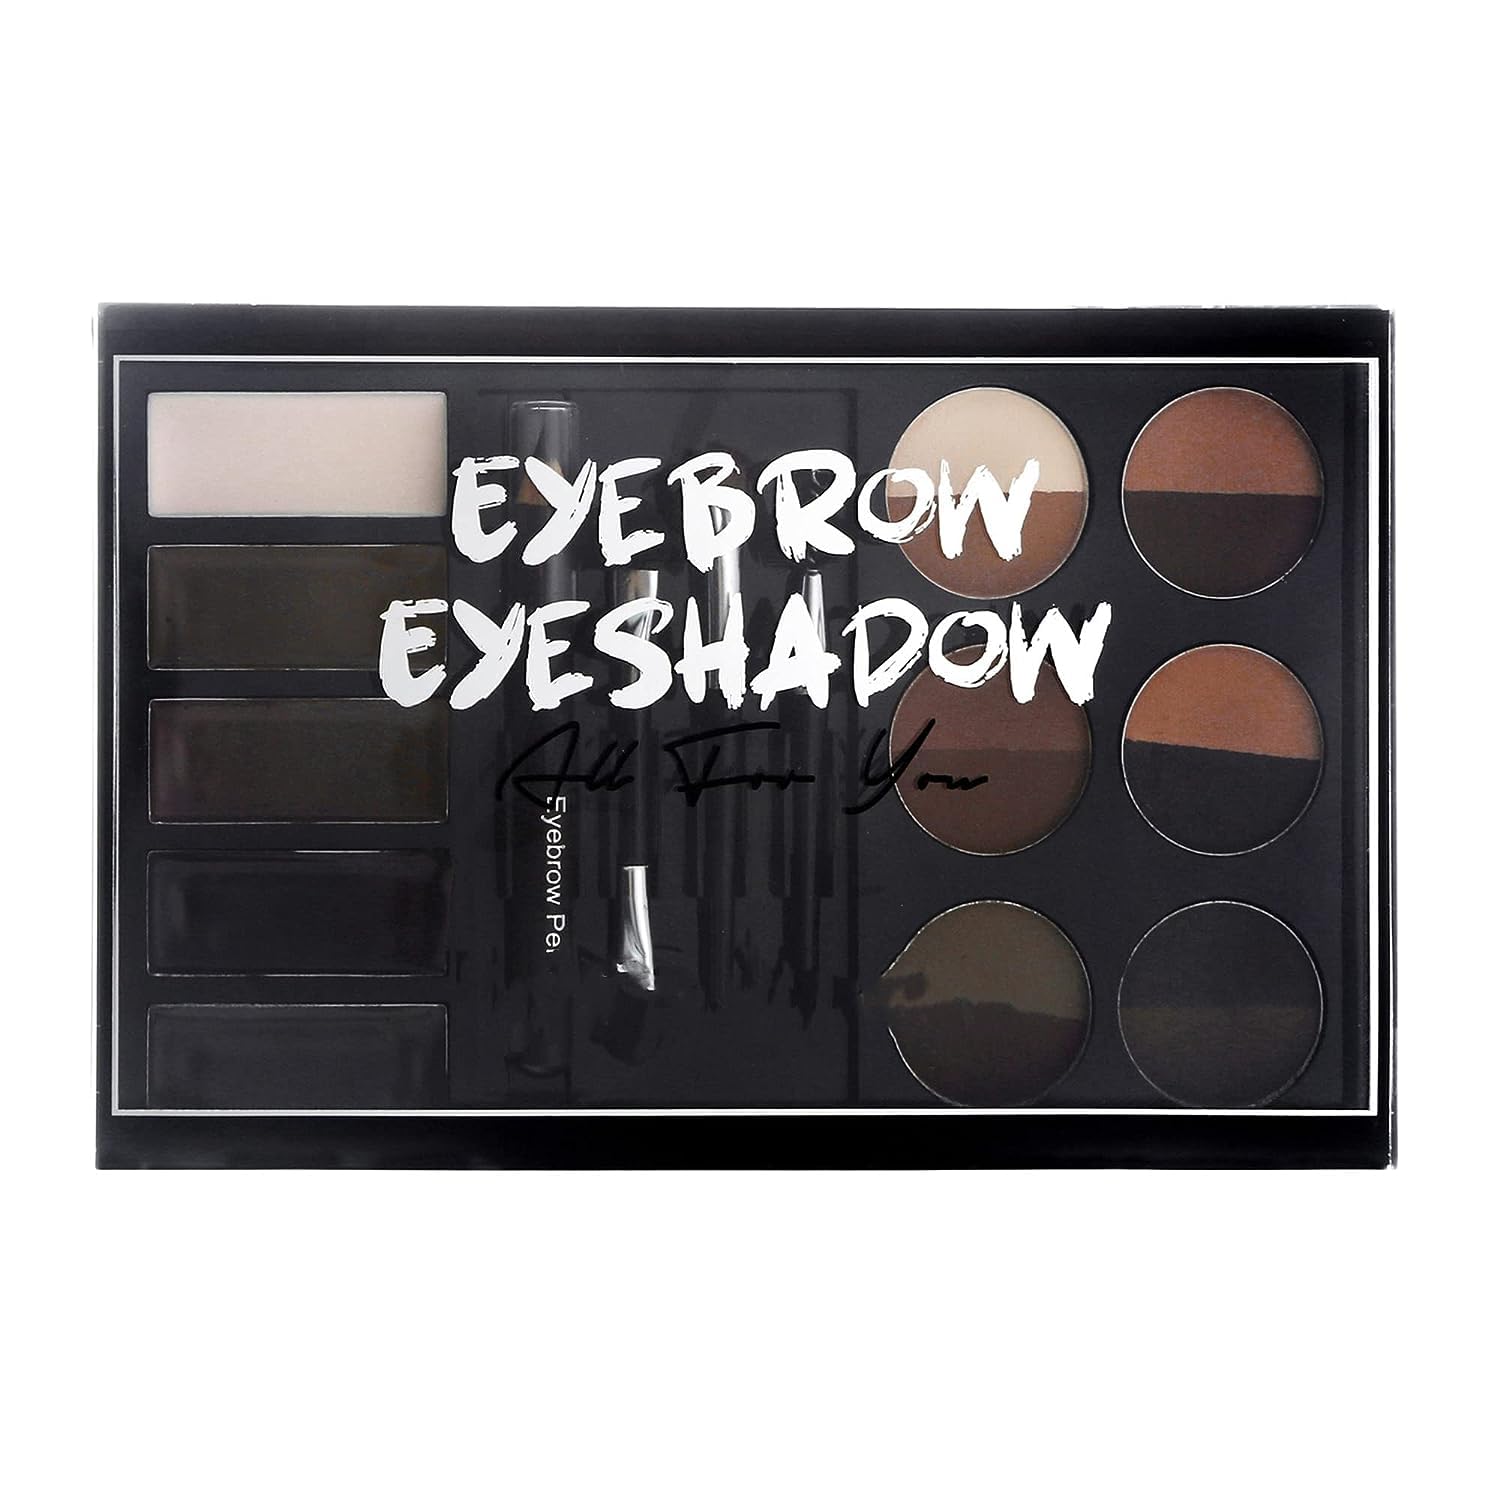 MAEPEOR Eye Brow Kit 25 Piece Waterproof Eyebrow Palette Set 12 Colors Eyebrow Powder 5 Colors Brow Wax 4 Eyebrow Stencils 3 Brushes 1 Eyebrow Pencil for Novice and Professional (25 Piece Set)